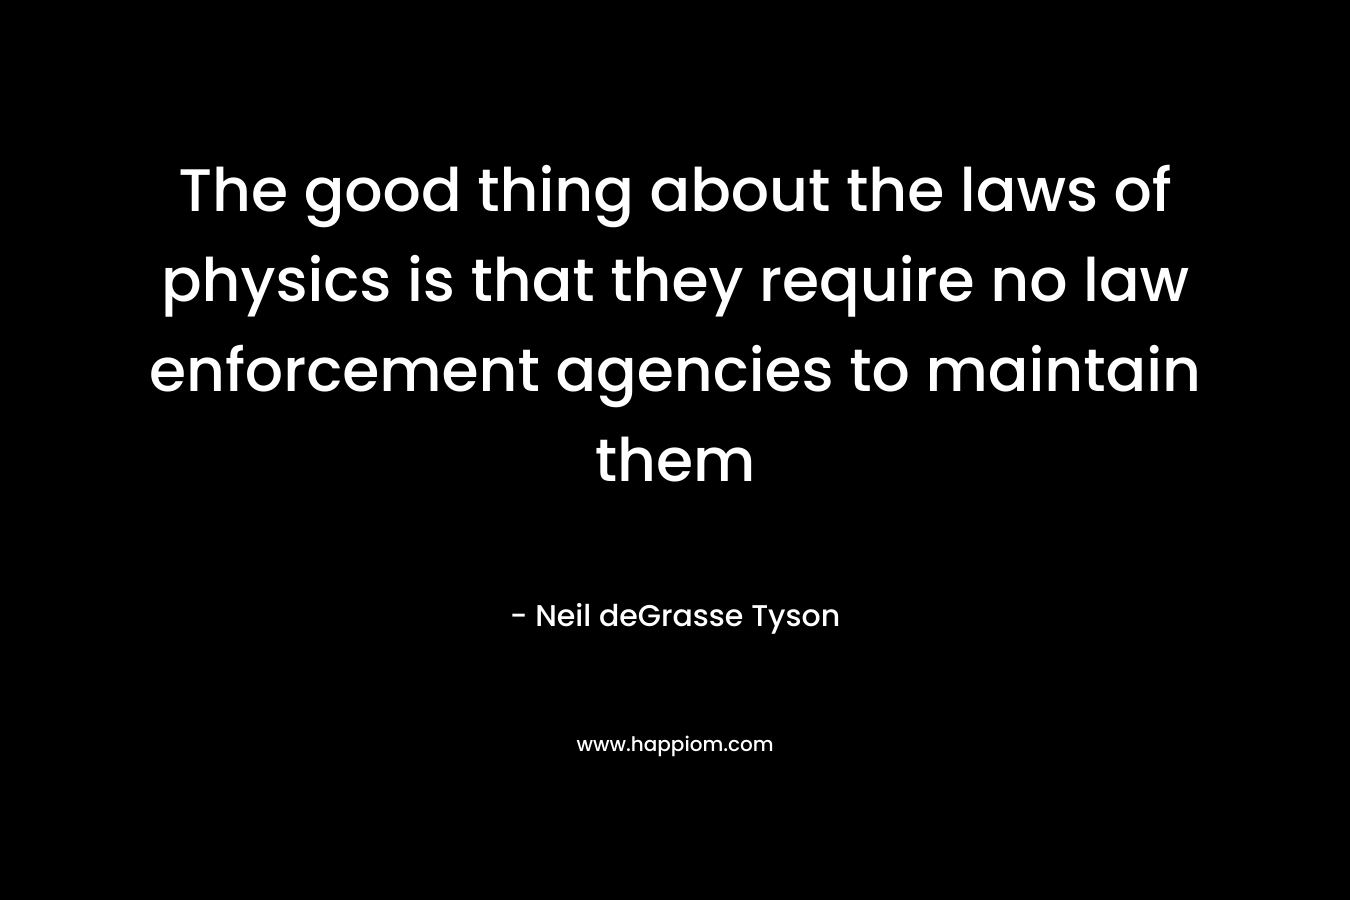 The good thing about the laws of physics is that they require no law enforcement agencies to maintain them